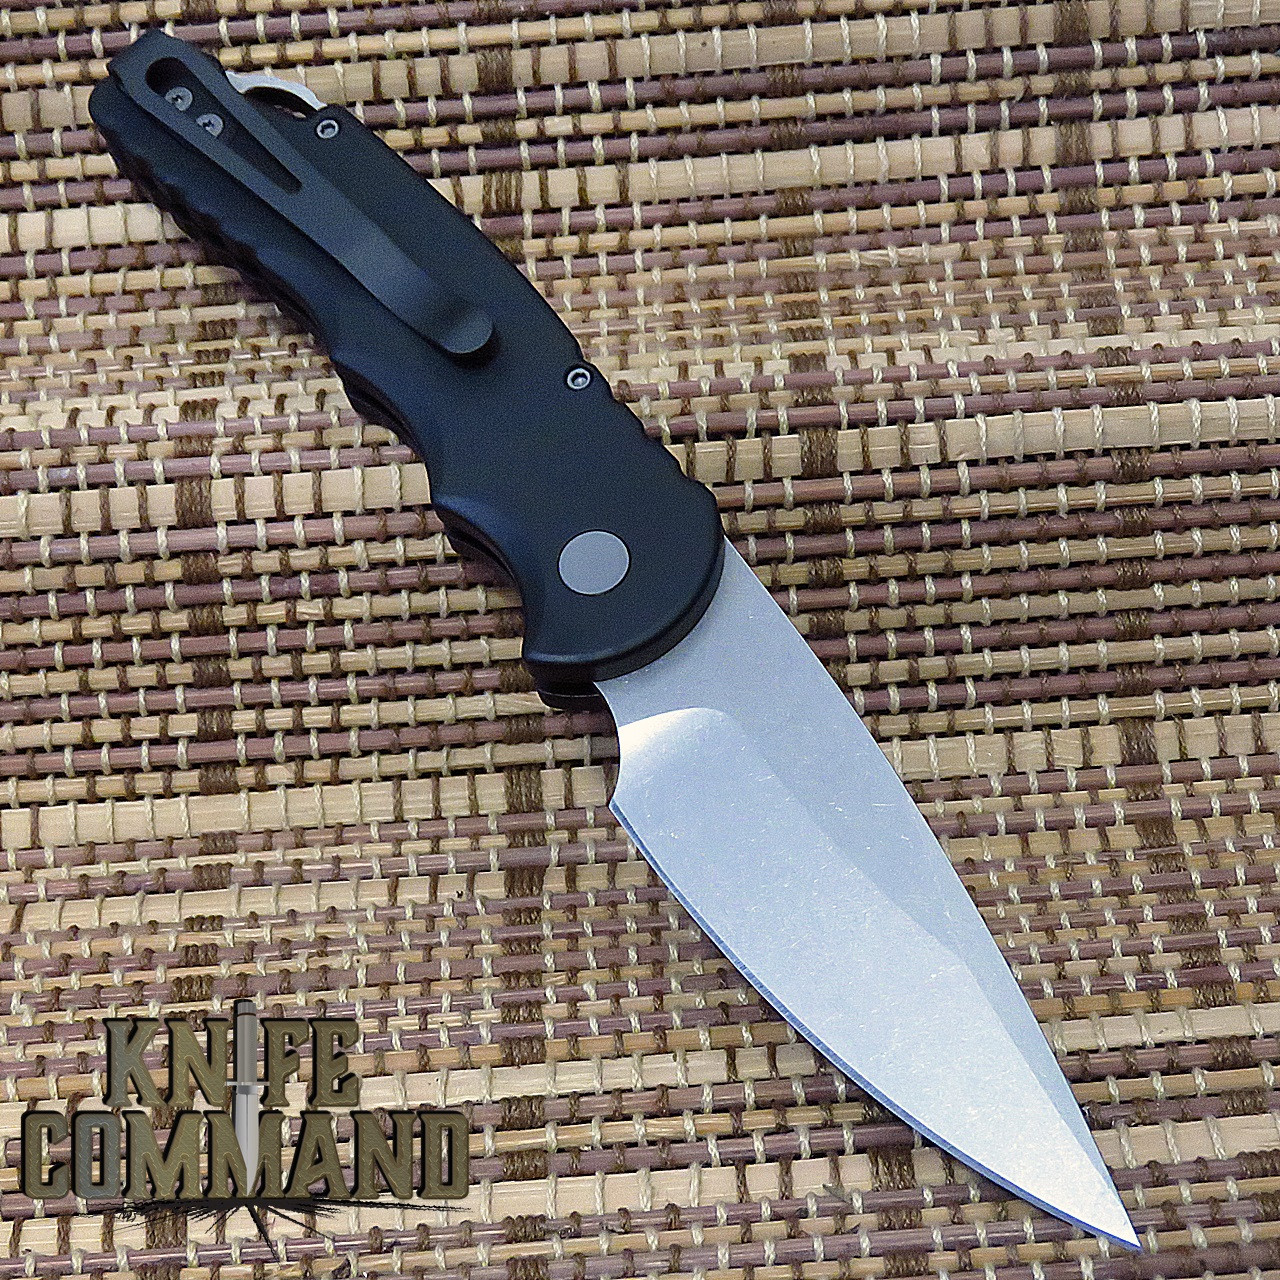 Pro-Tech Knives T501 Tactical Response TR-5 Automatic Knife Police Law Enforcement Folder 3.25" S35-VN Stonewash Blade